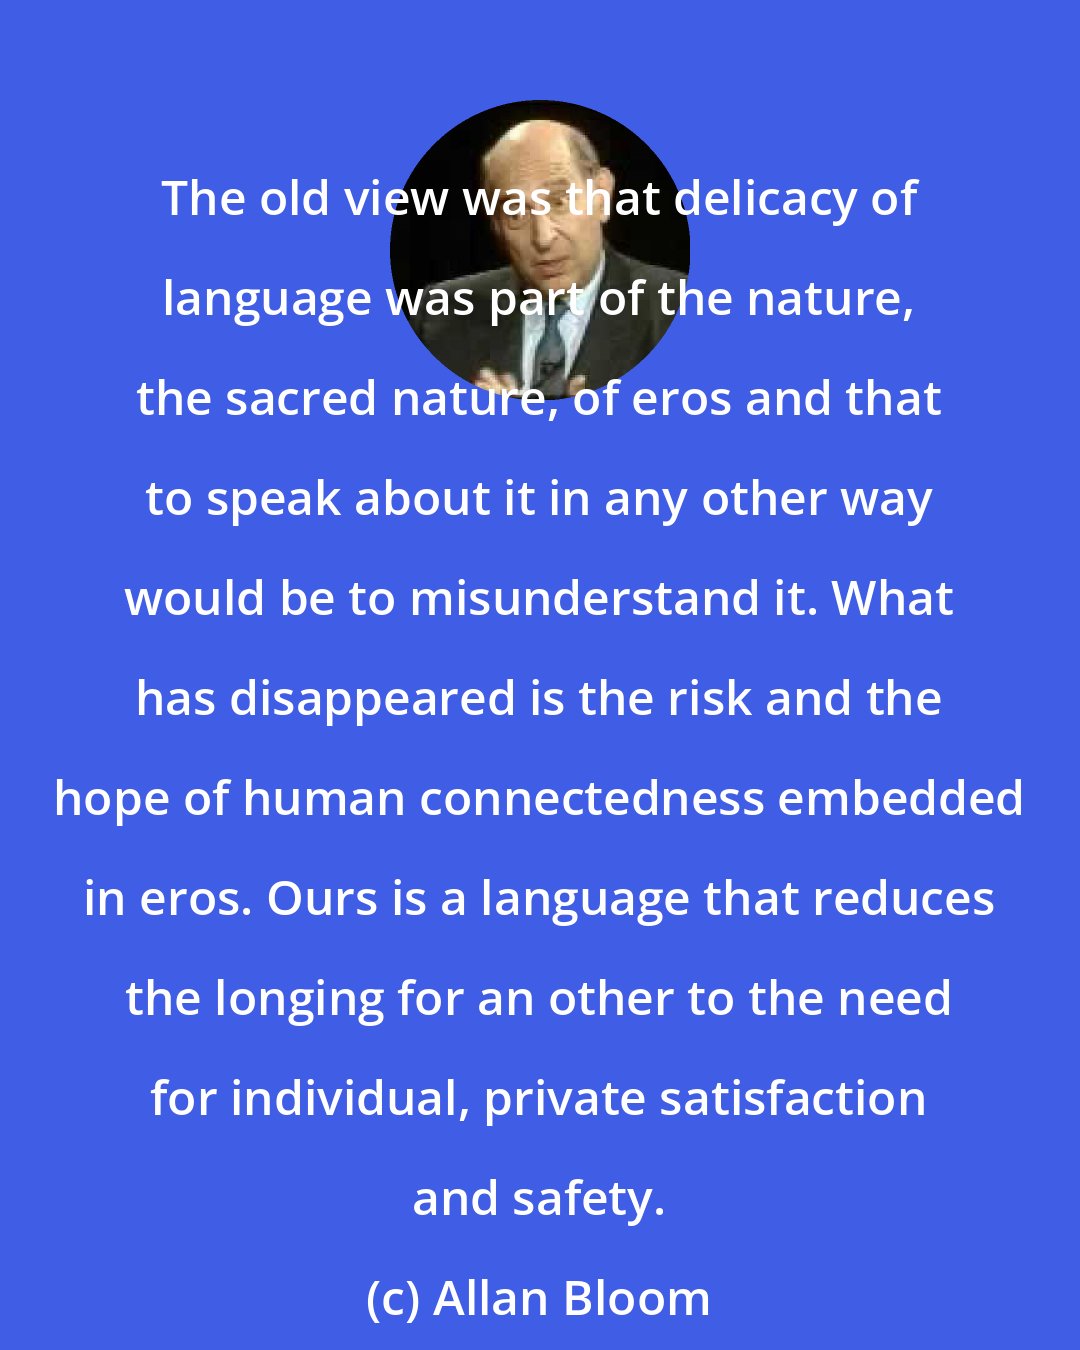 Allan Bloom: The old view was that delicacy of language was part of the nature, the sacred nature, of eros and that to speak about it in any other way would be to misunderstand it. What has disappeared is the risk and the hope of human connectedness embedded in eros. Ours is a language that reduces the longing for an other to the need for individual, private satisfaction and safety.